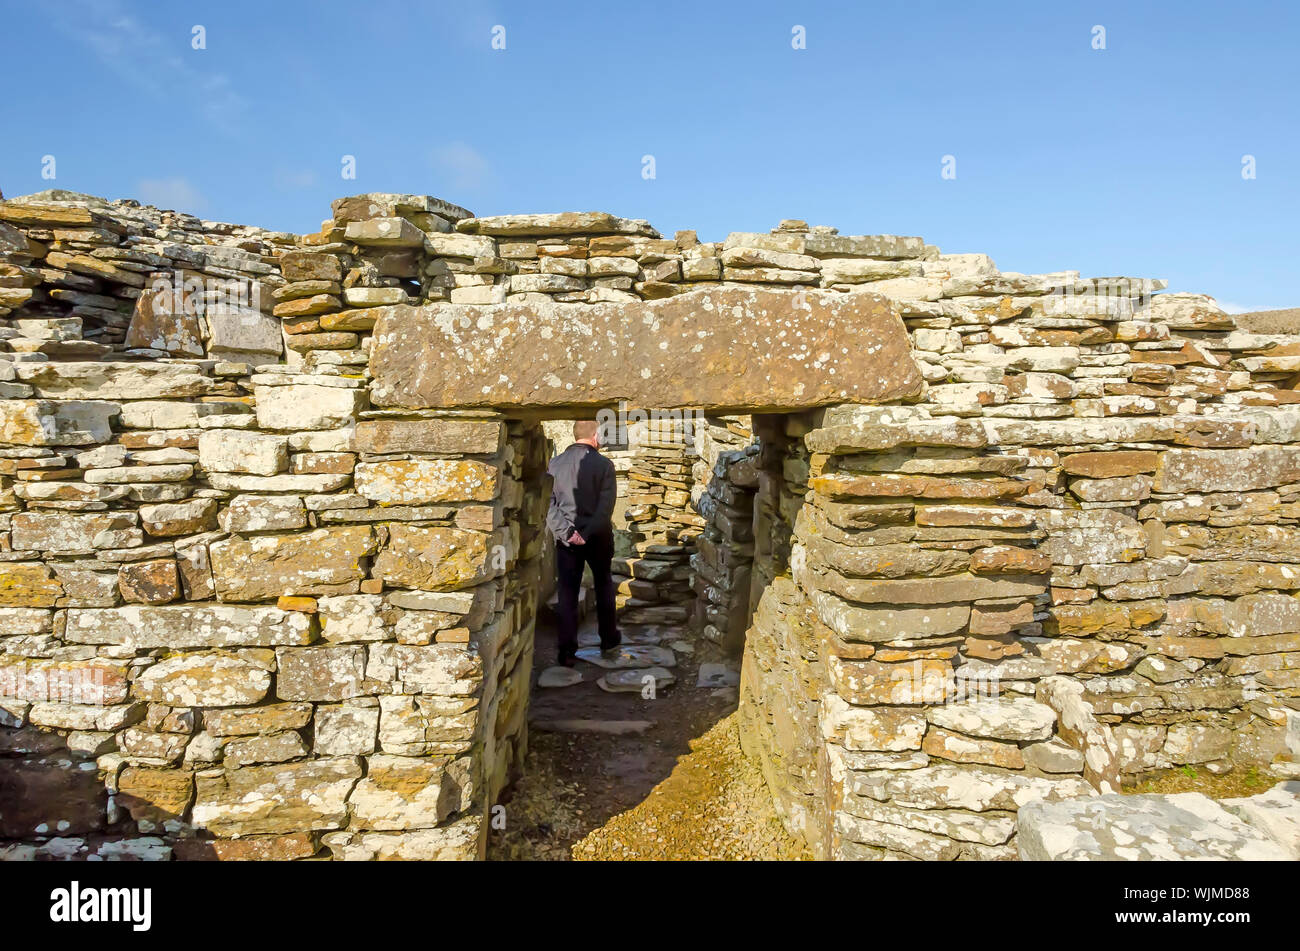 Broch of Gurness Entrance Orkney Islands, Scotland. Person inside for size comparison. A broch is a rounded Iron Age tower unique to Scotland. Stock Photo